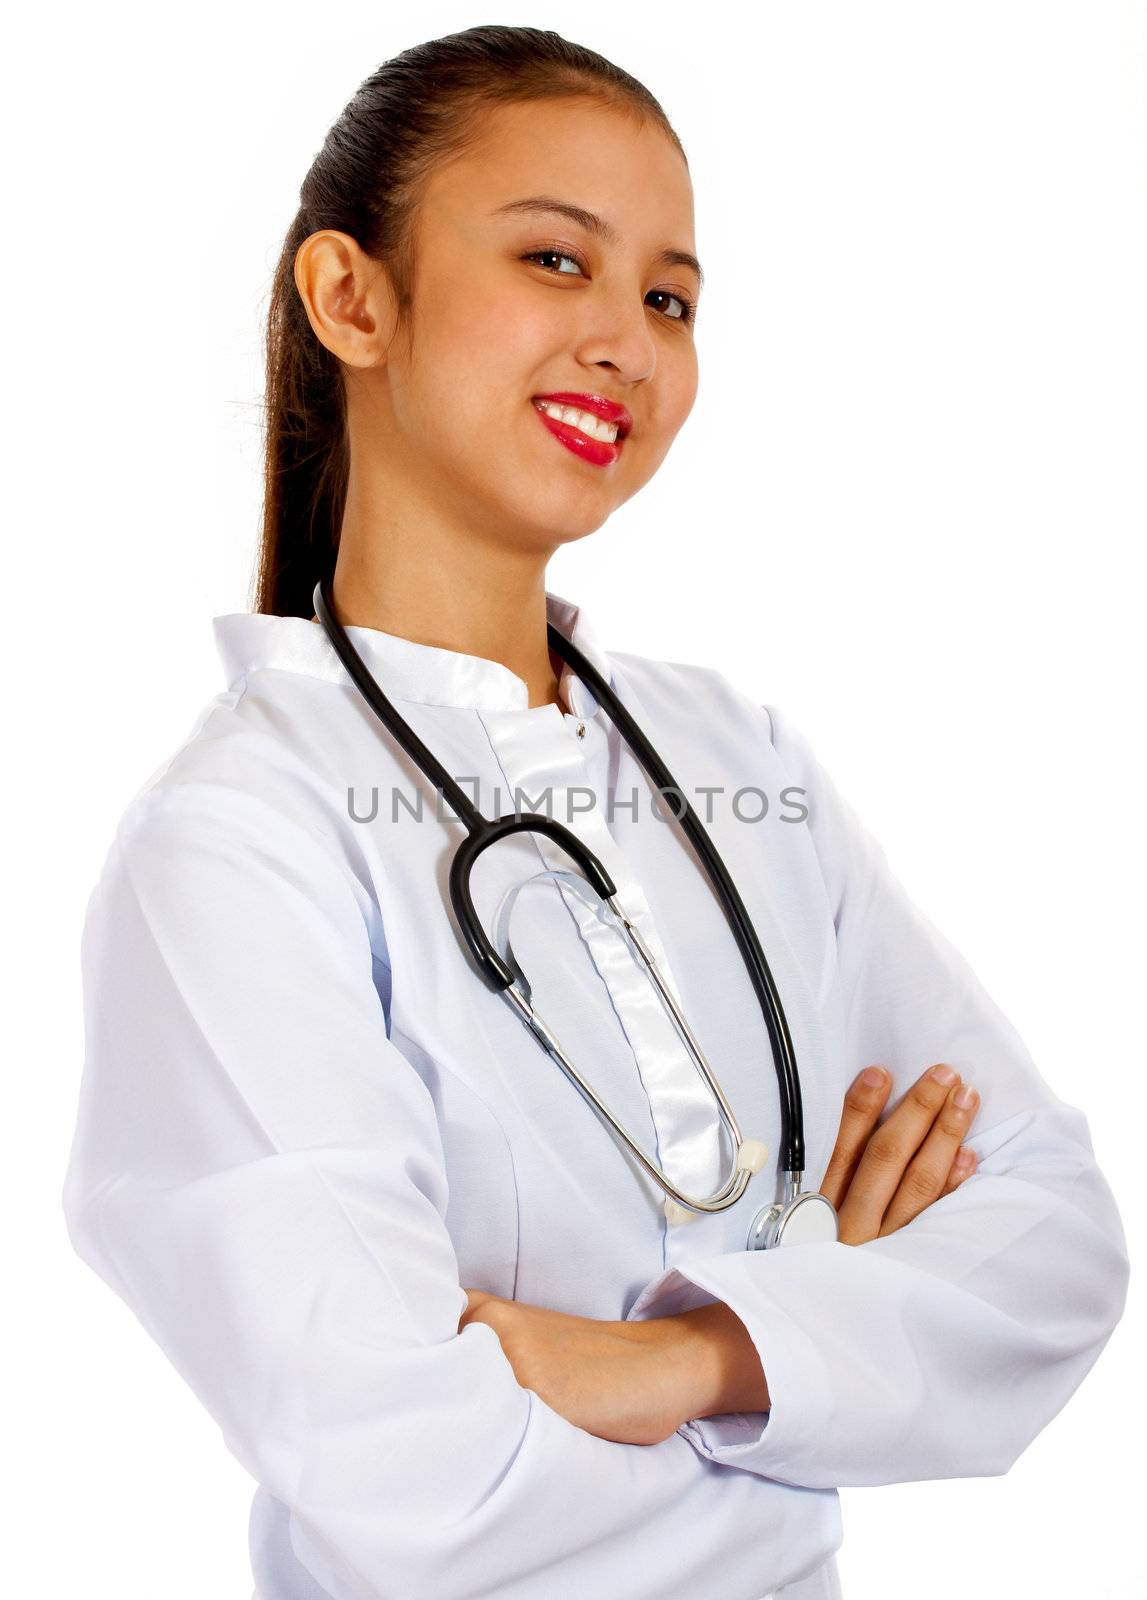 Young Doctor With Stethoscope by stuartmiles